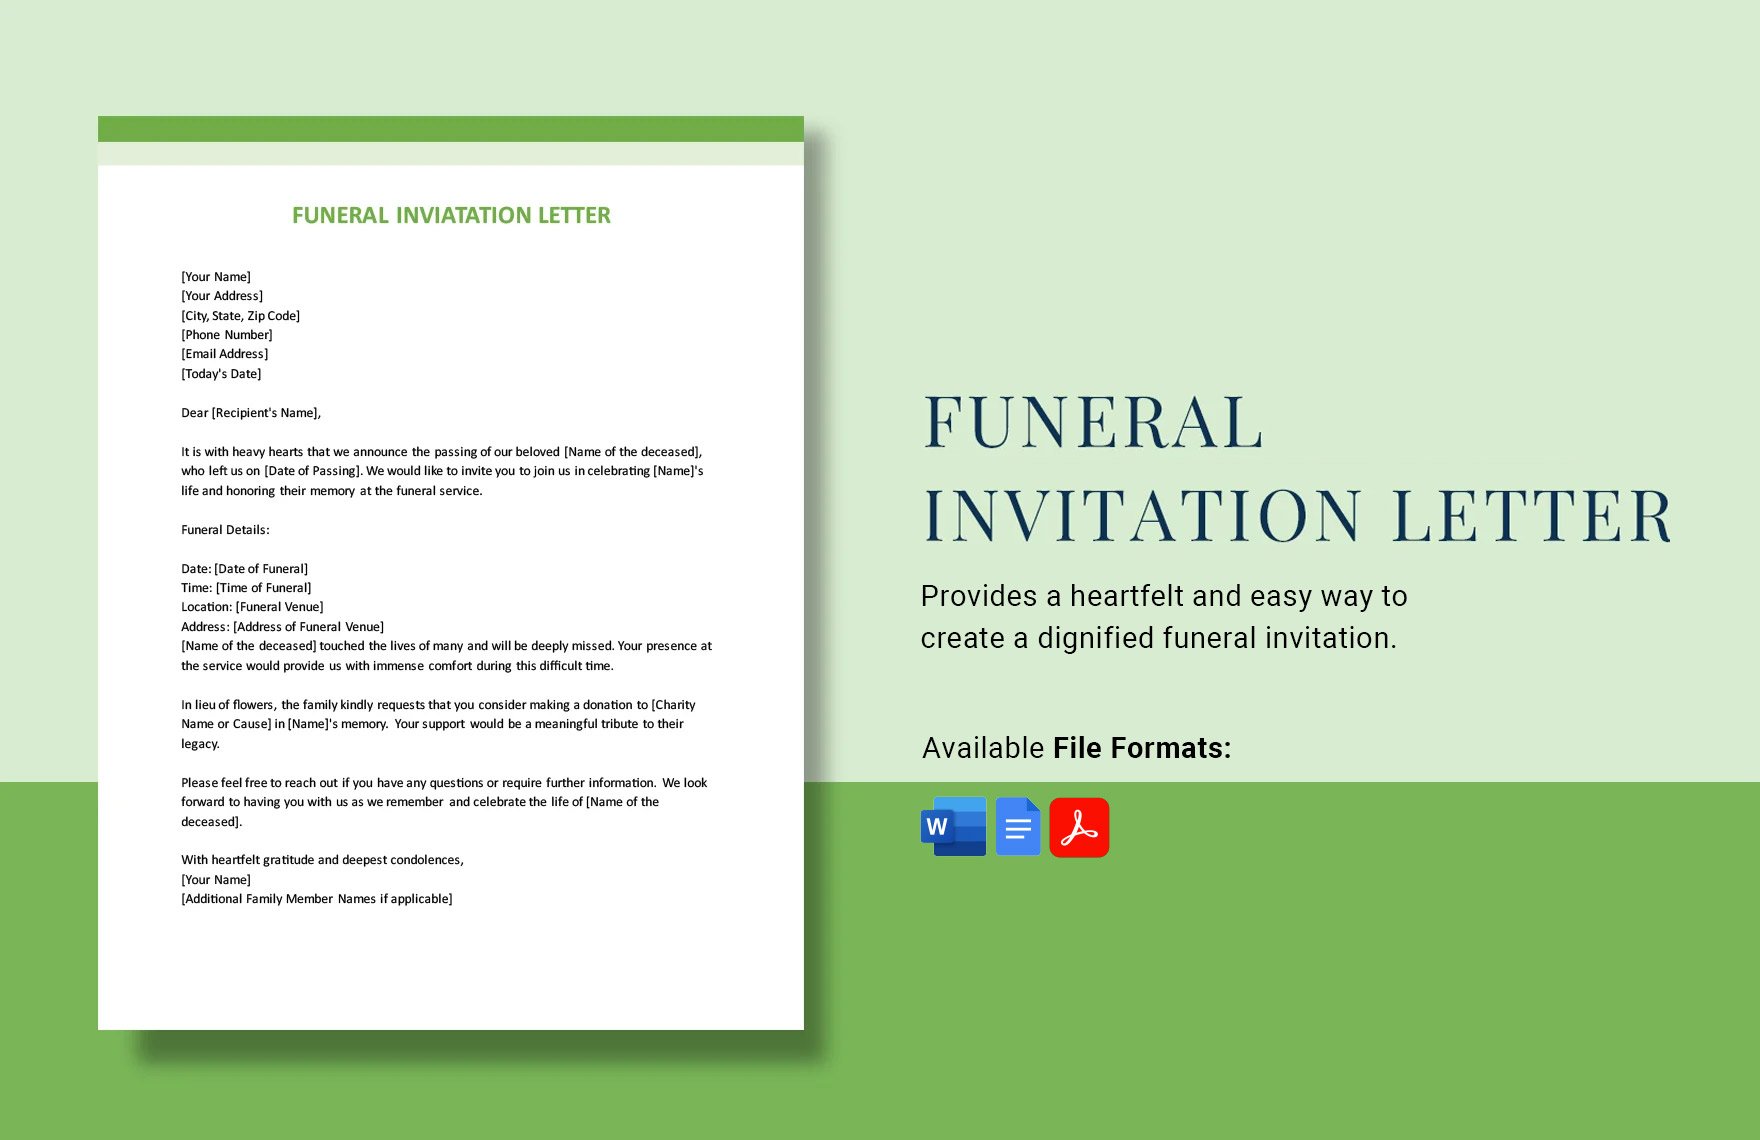 Funeral Invitation Letter in Word, Google Docs, PDF